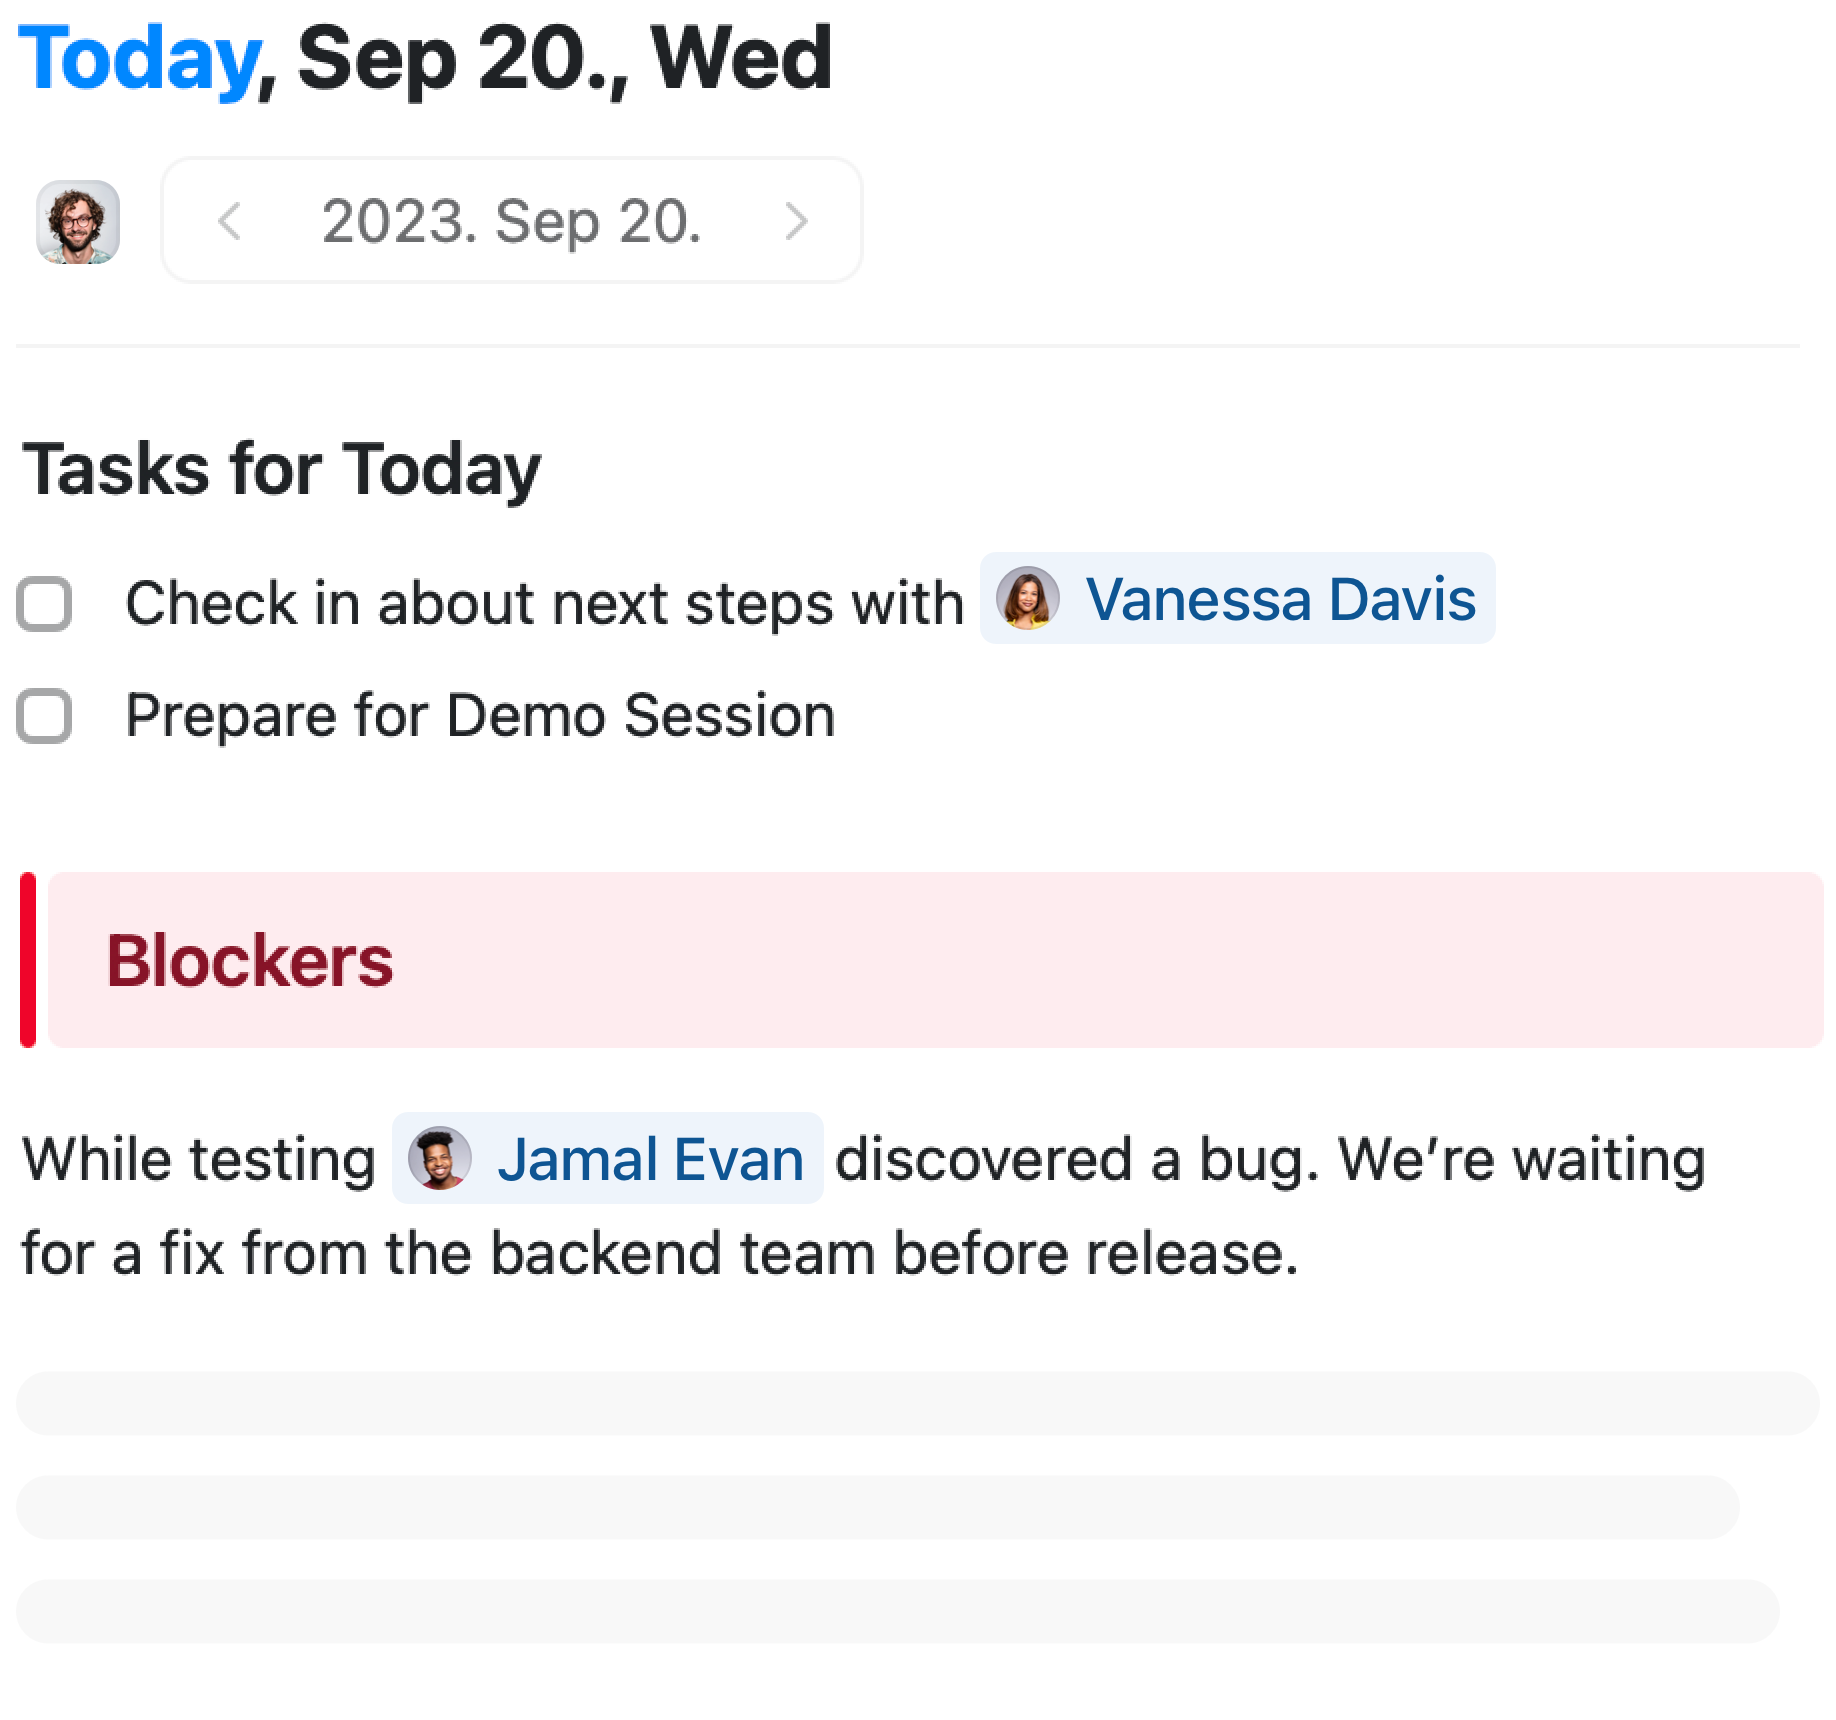 A team member sharing a daily update in Craft tasks and blockers for today